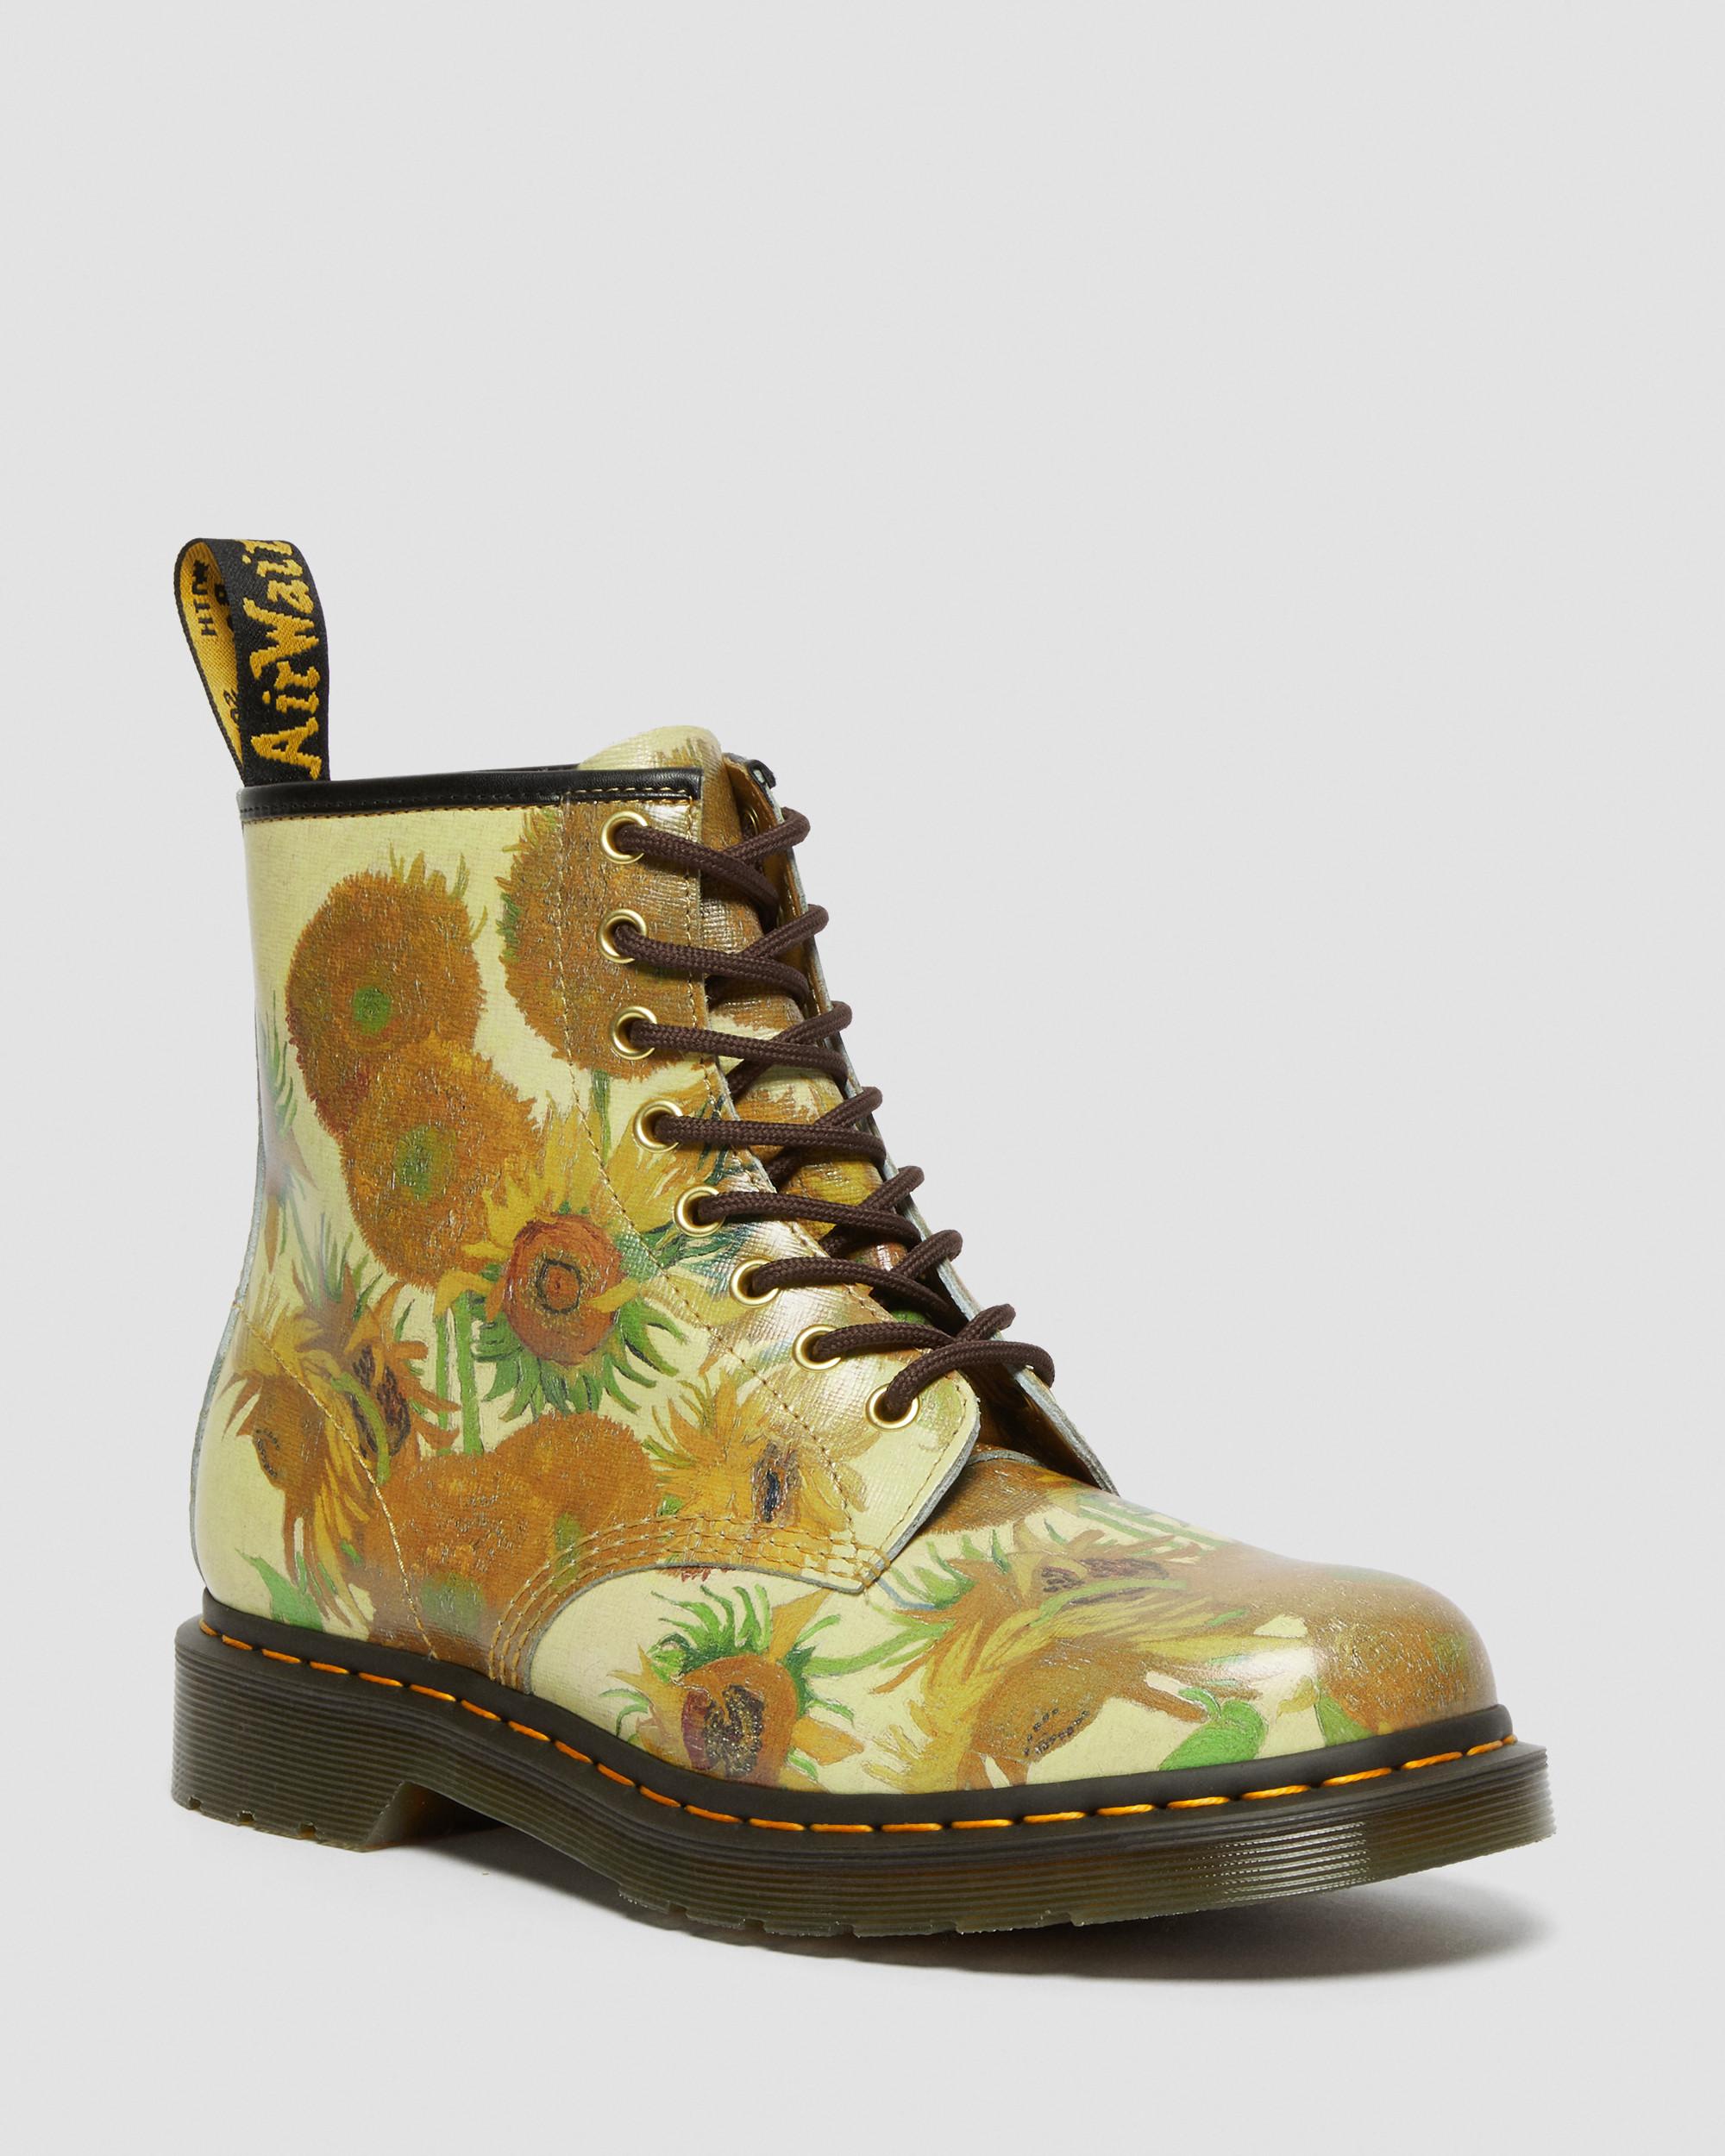 Jurassic Park Experiment schoorsteen 1460 The National Gallery Van Gogh Lace Up Boots | Dr. Martens